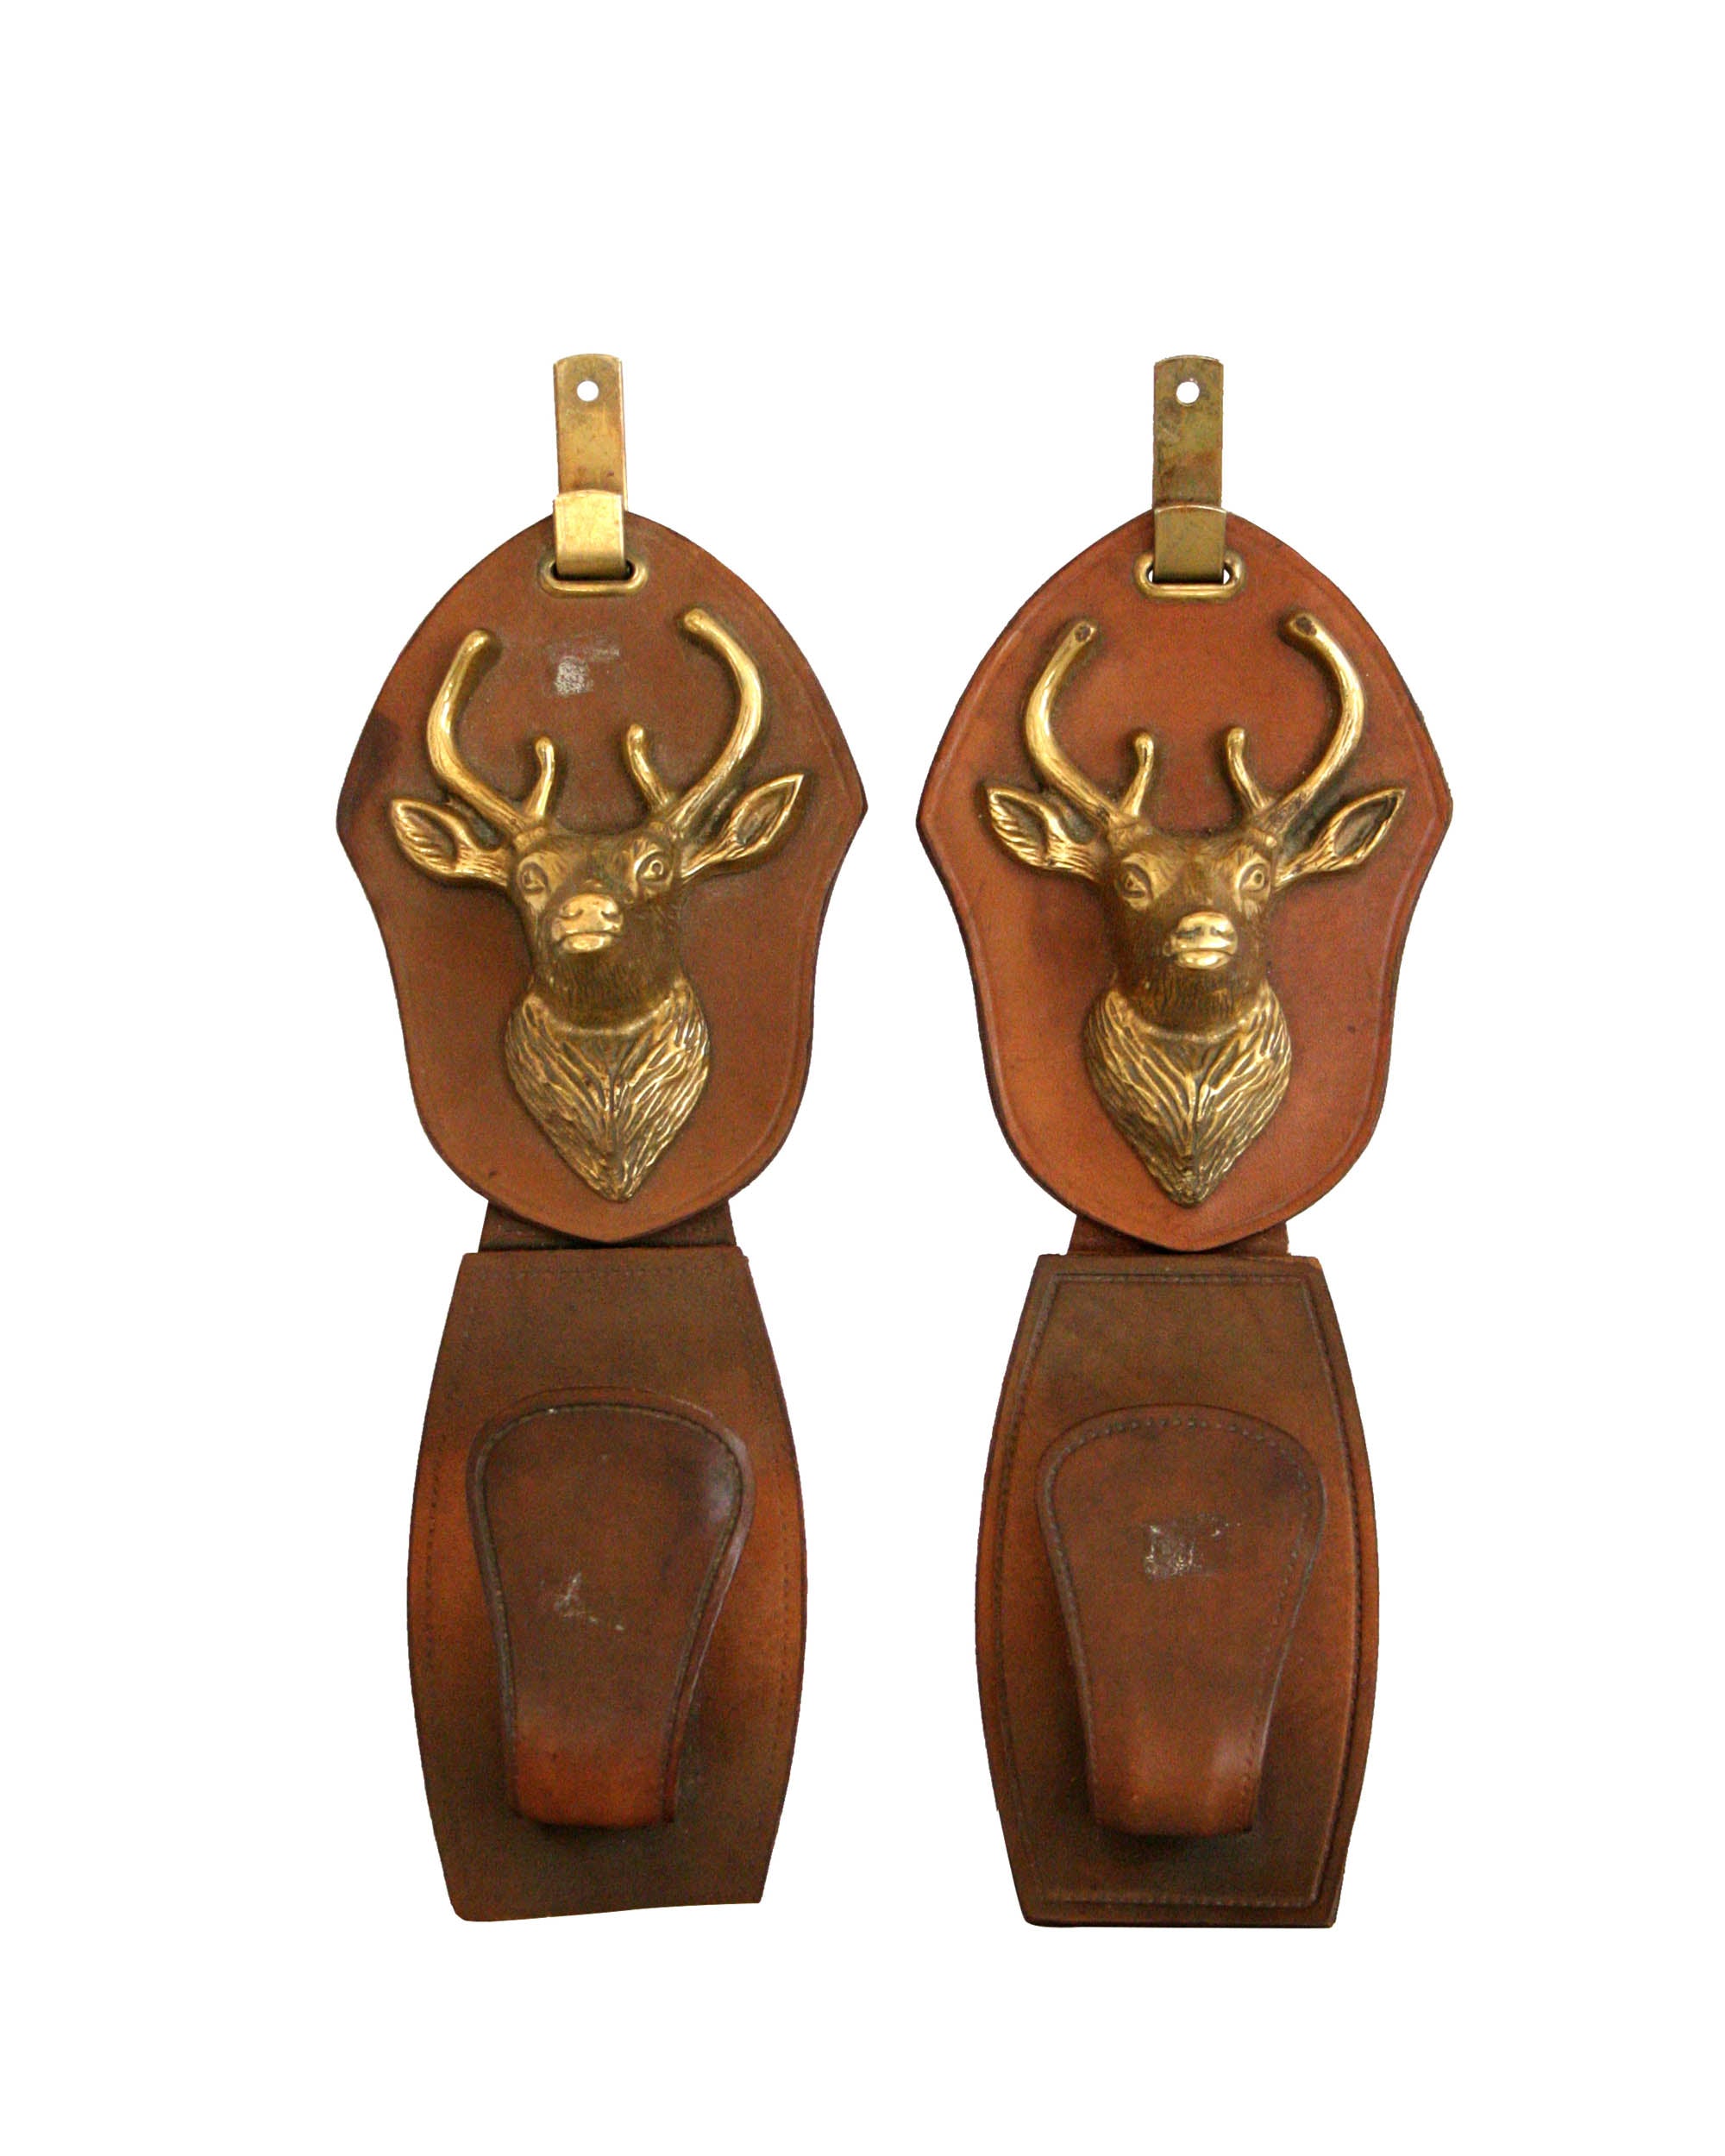 Couple of pegs made on leather with deer head carving in bronze